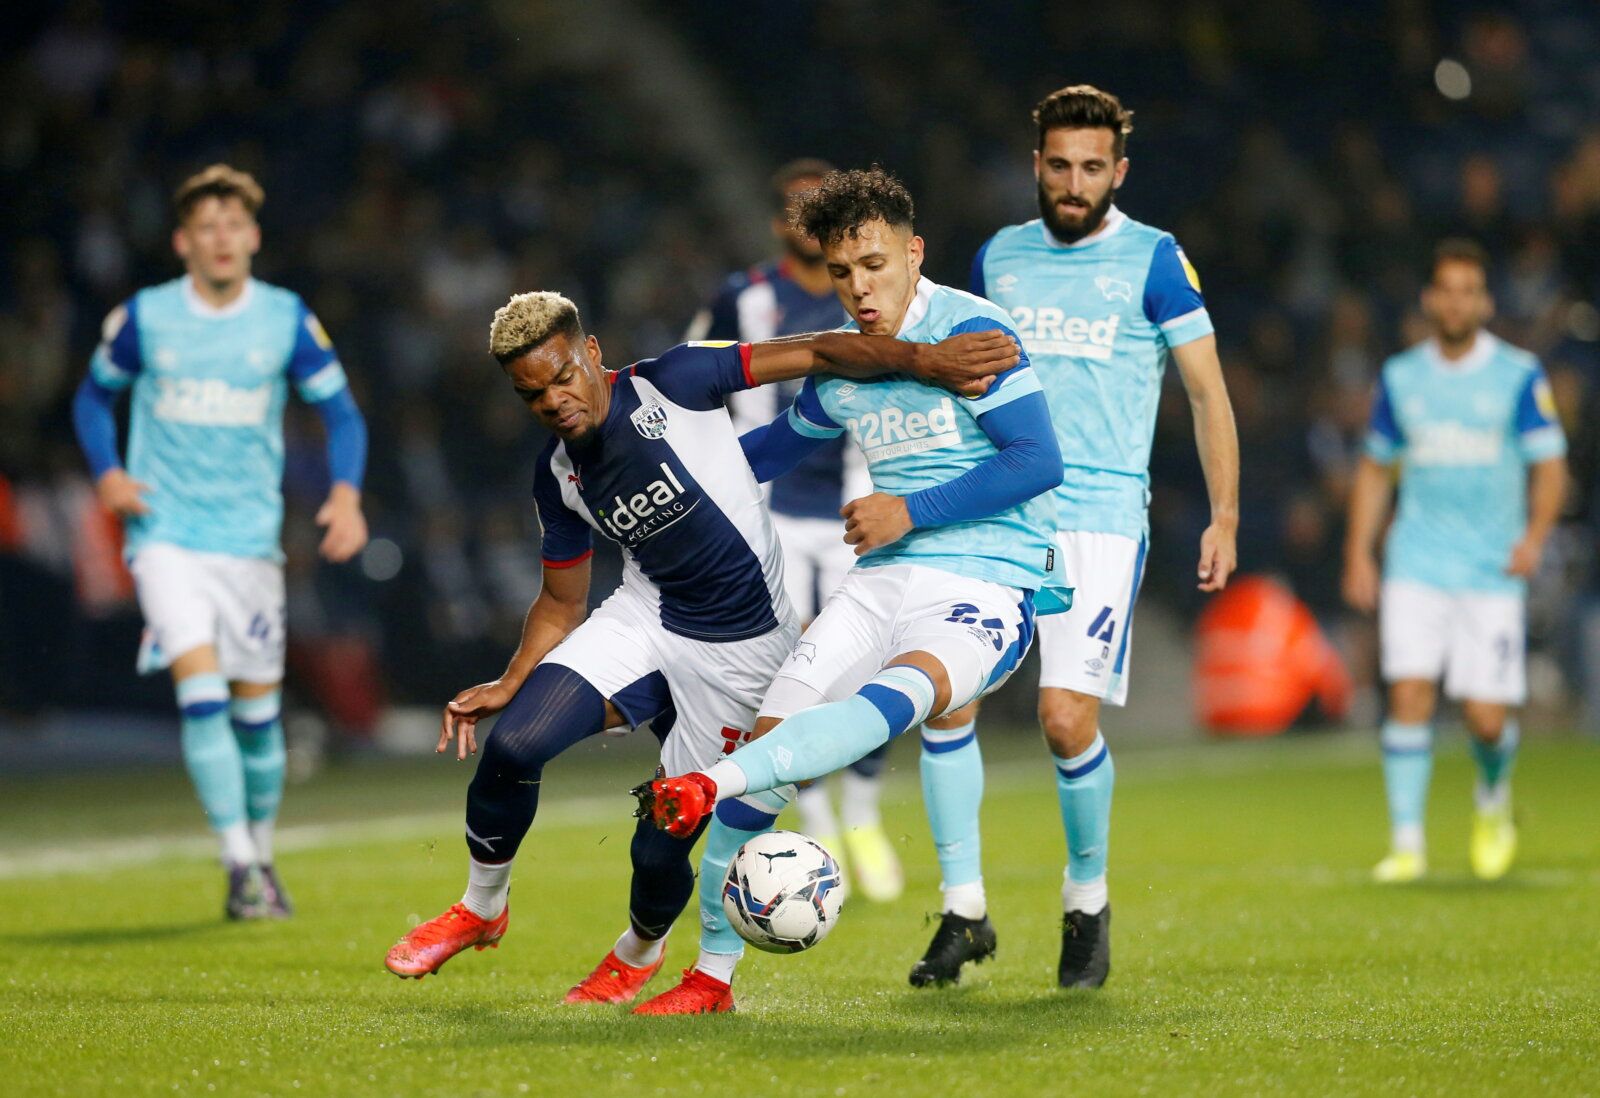 Soccer Football - Championship - West Bromwich Albion v Derby County - The Hawthorns, West Bromwich, Britain - September 14, 2021 West Bromwich Albion's Grady Diangana in action with Derby County's Lee Buchanan Action Images/Ed Sykes